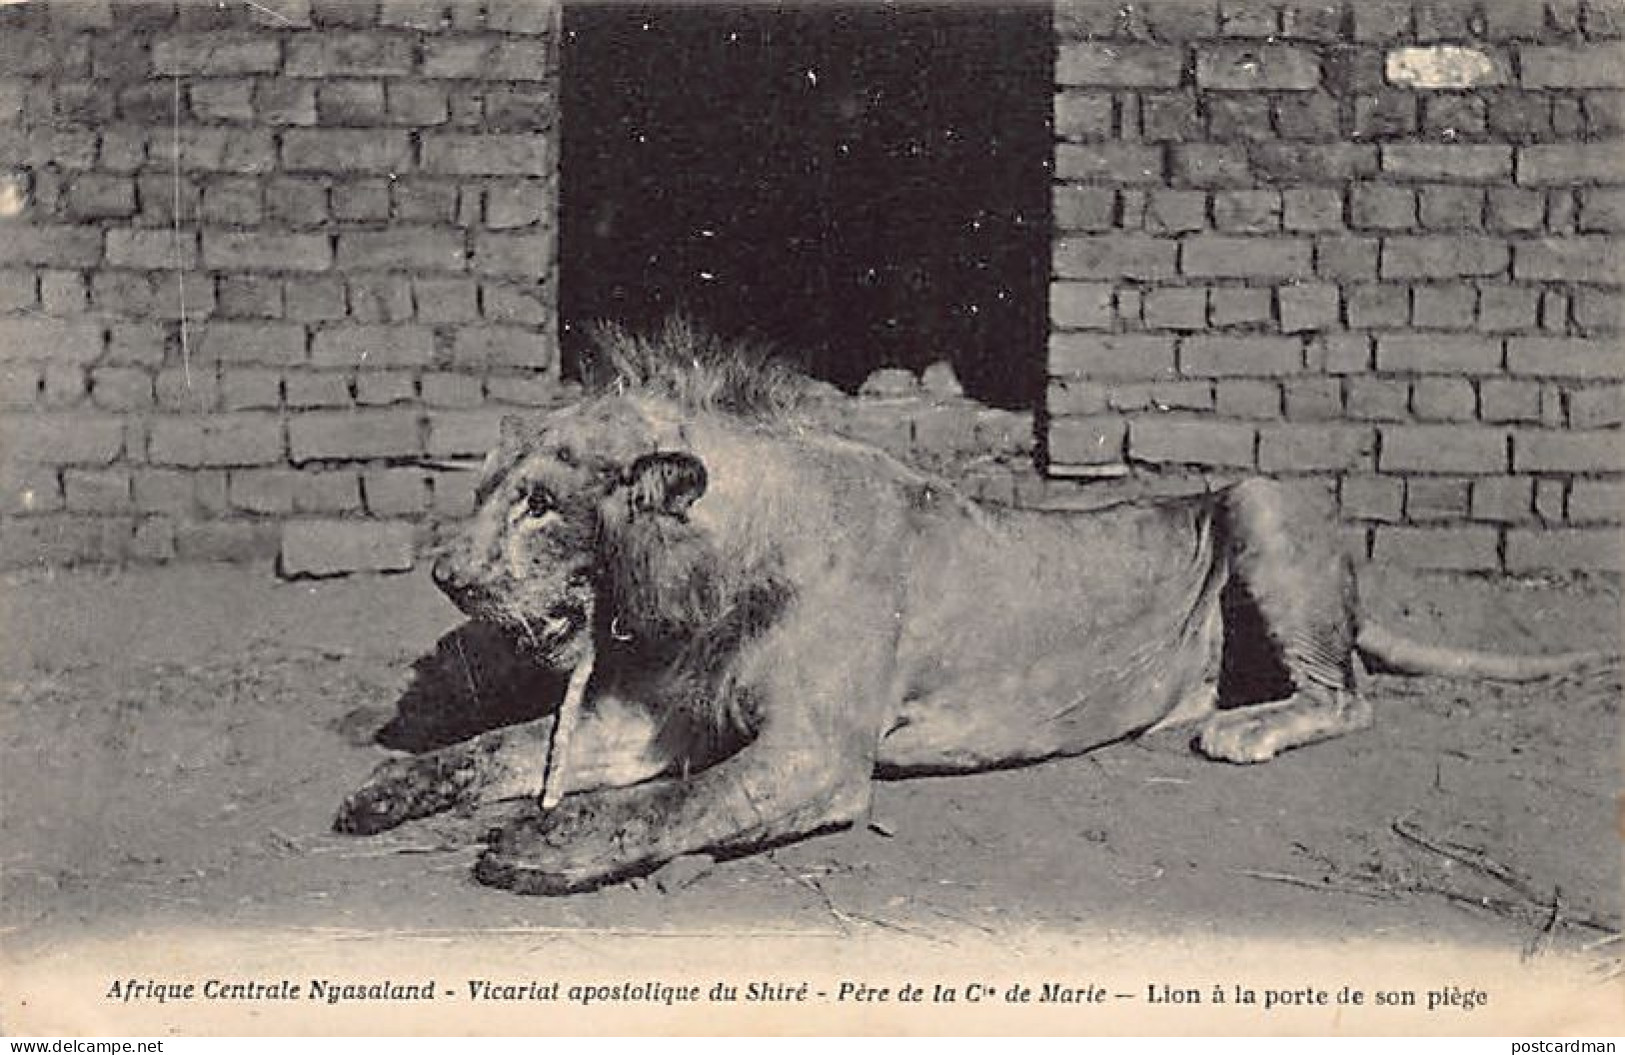 Malawi - Trapped Lion - Publ. Apostolic Vicariate Of The Shire - Father Of The Company Of Mary - Malawi